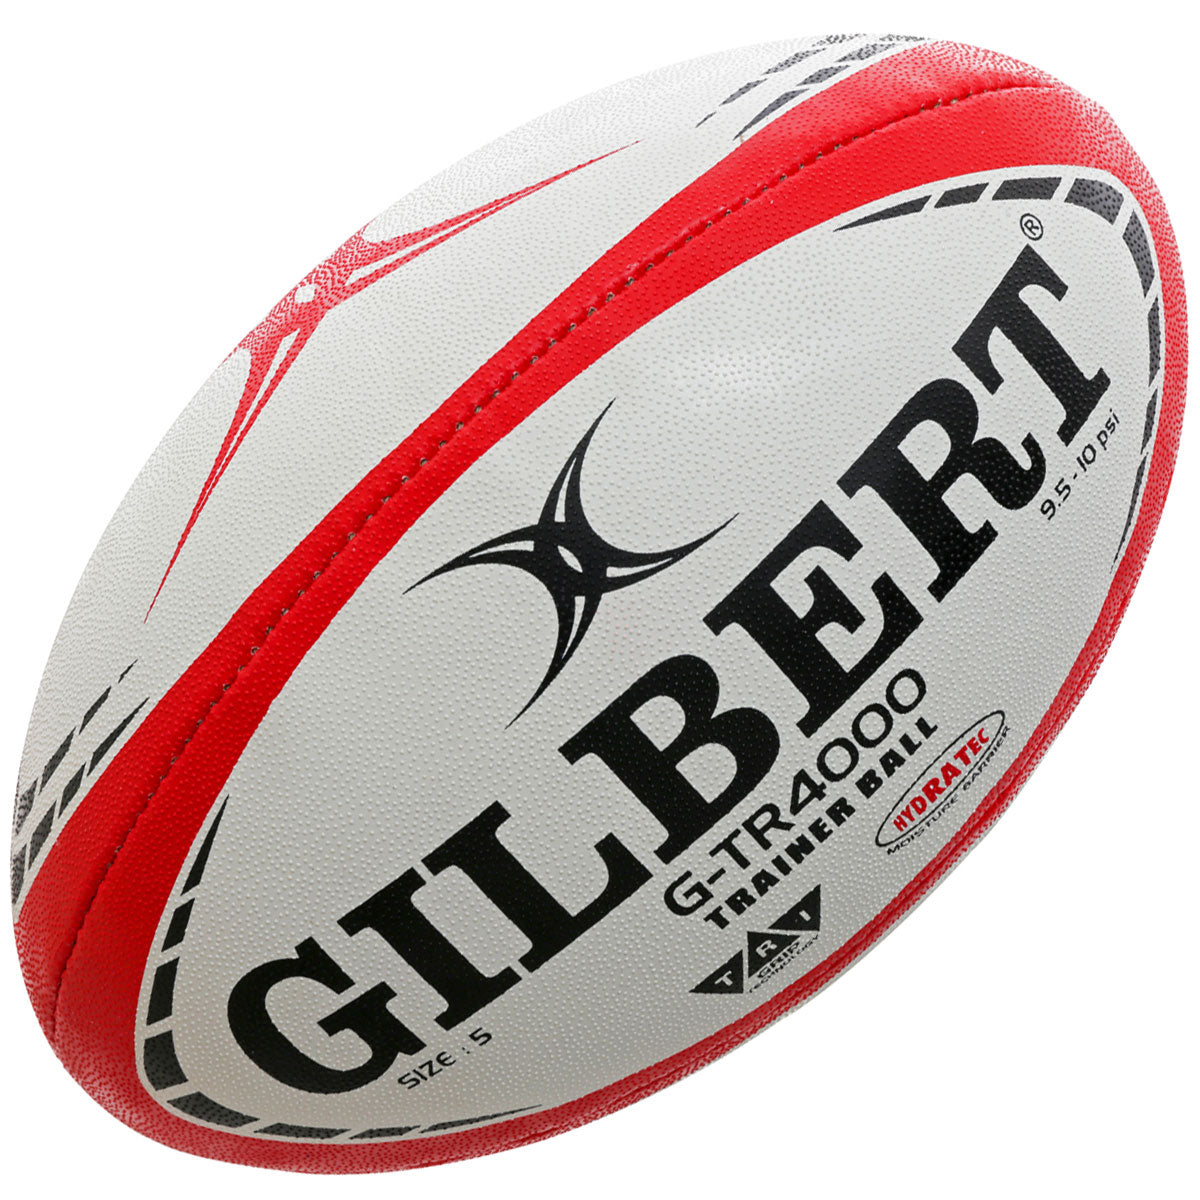 Gilbert G-TR4000 Training Rugby Ball - White/Red